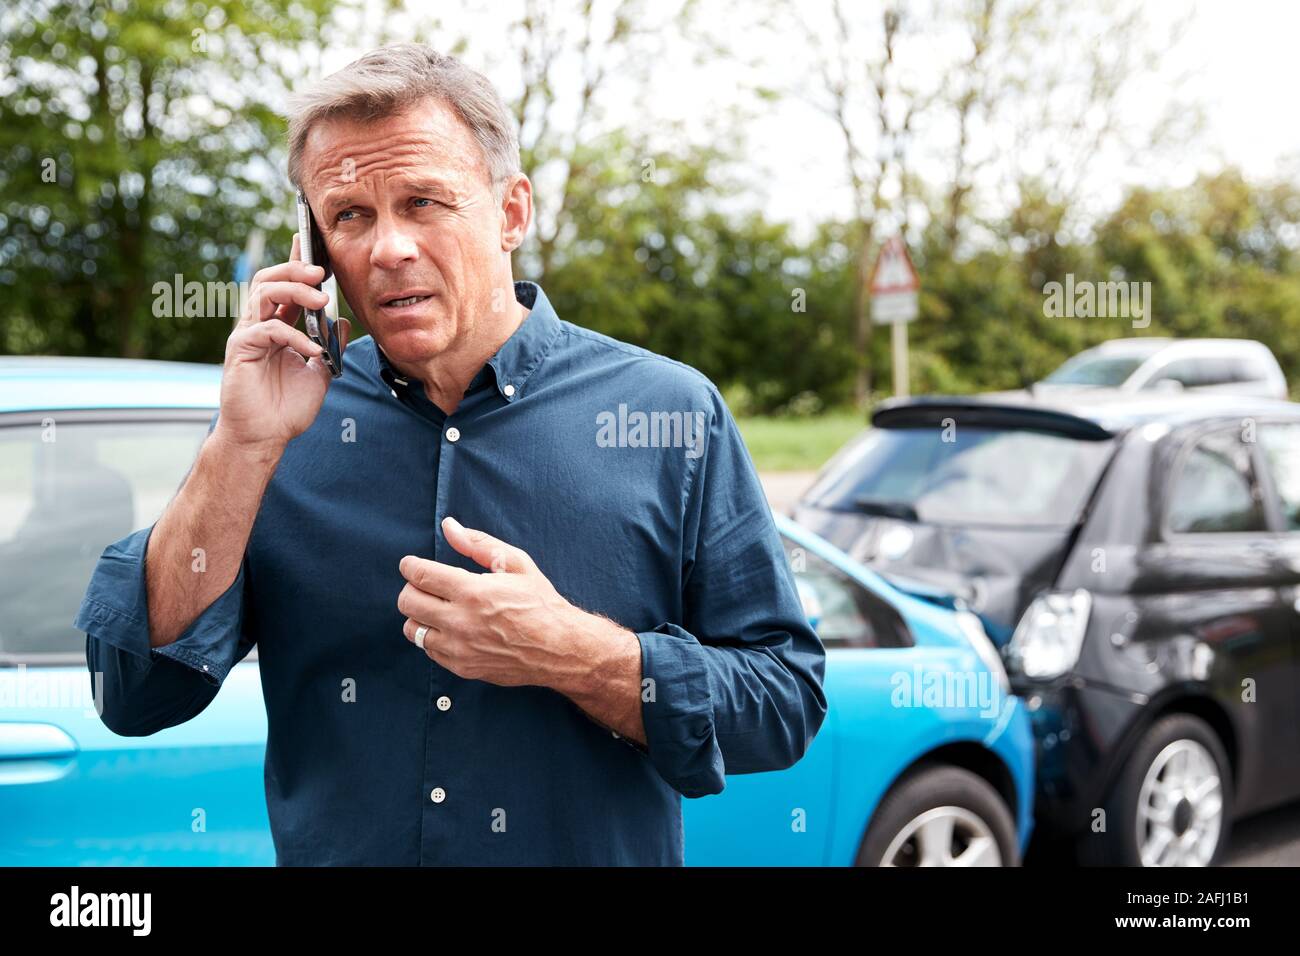 Mature Male Motorist Involved In Car Accident Calling Insurance Company Or Recovery Service Stock Photo